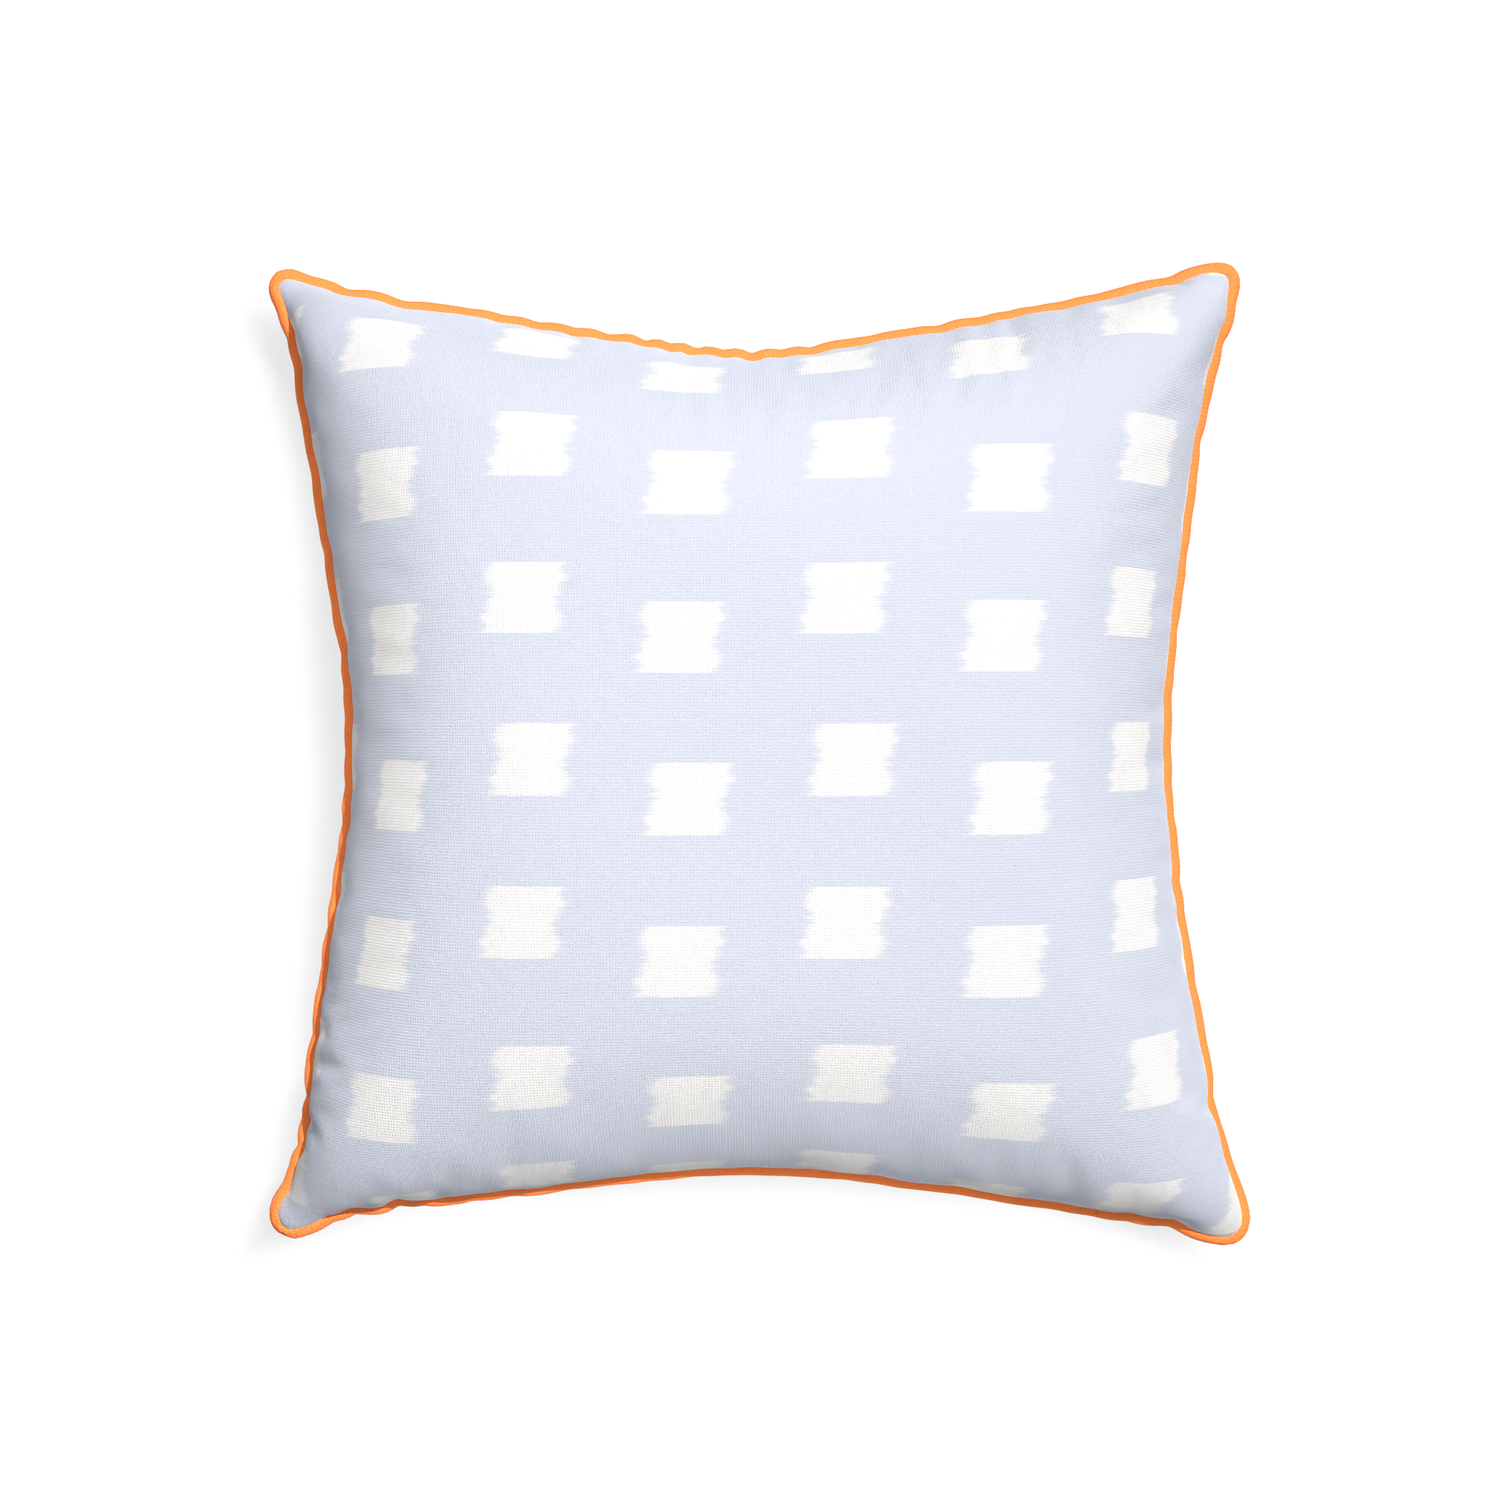 22-square denton custom sky blue patternpillow with clementine piping on white background